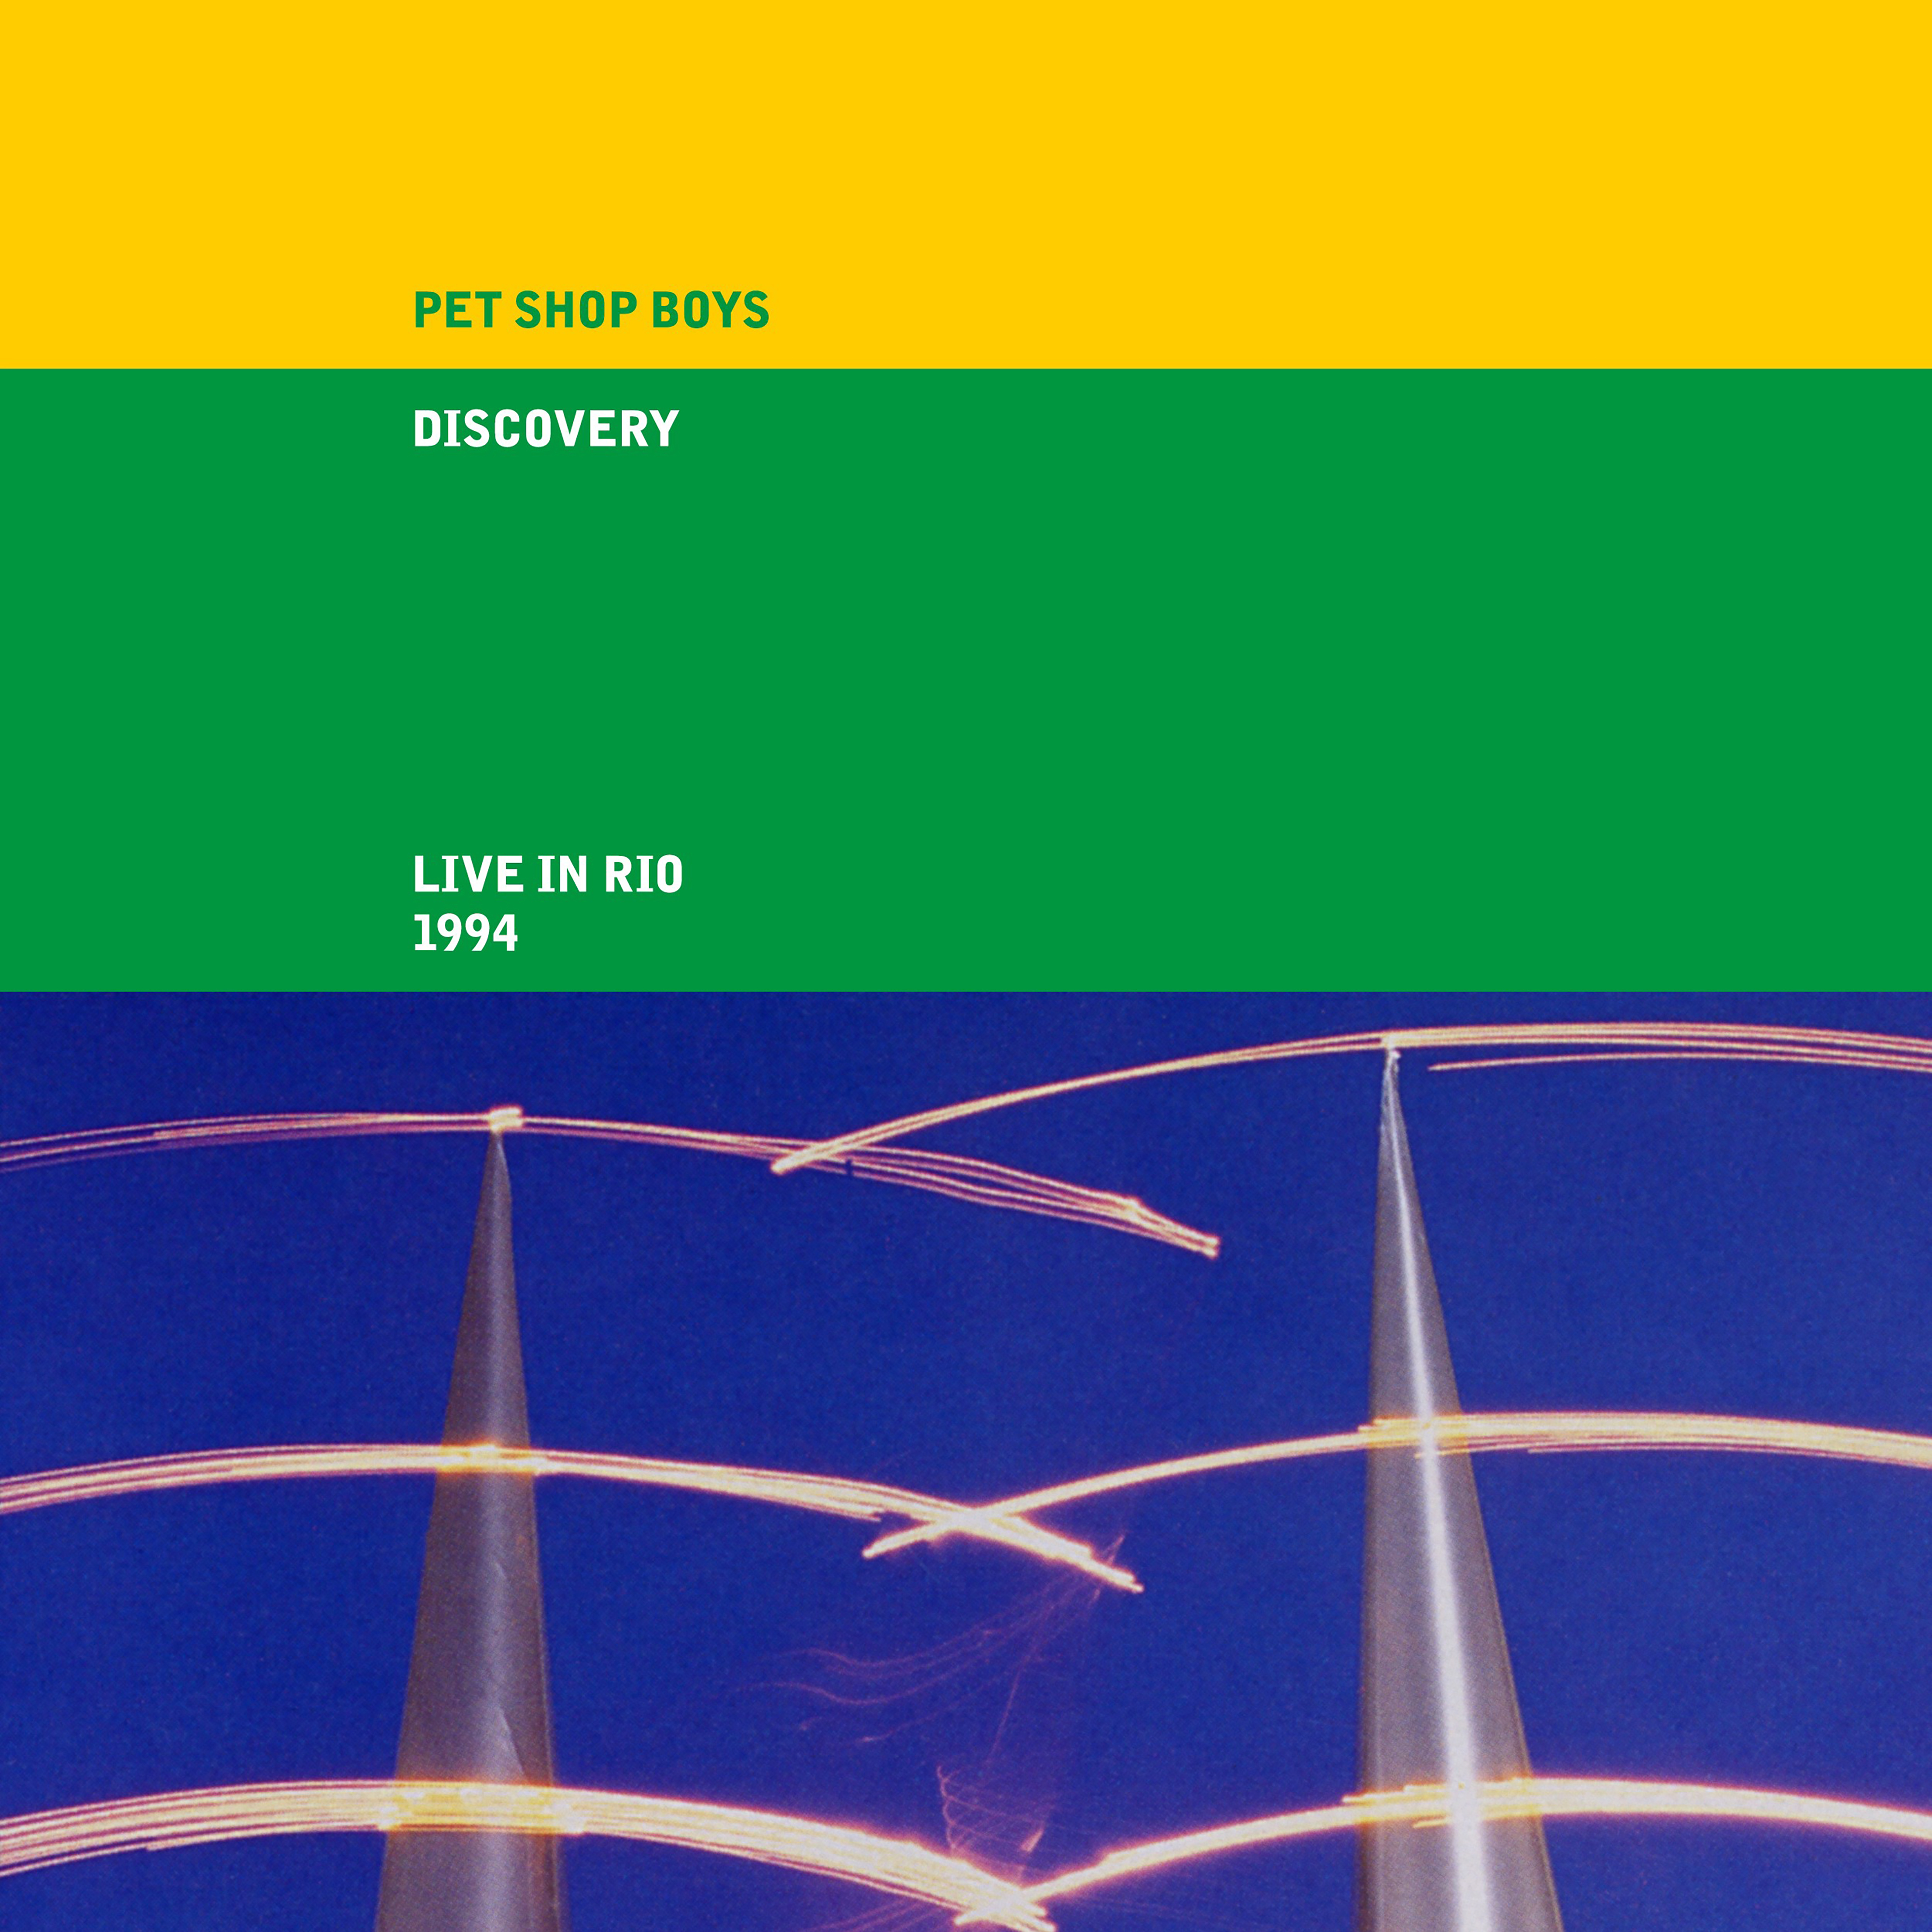 Pet Shop Boys [Discovery: Live in Rio 1994] (2CD+1DVD)